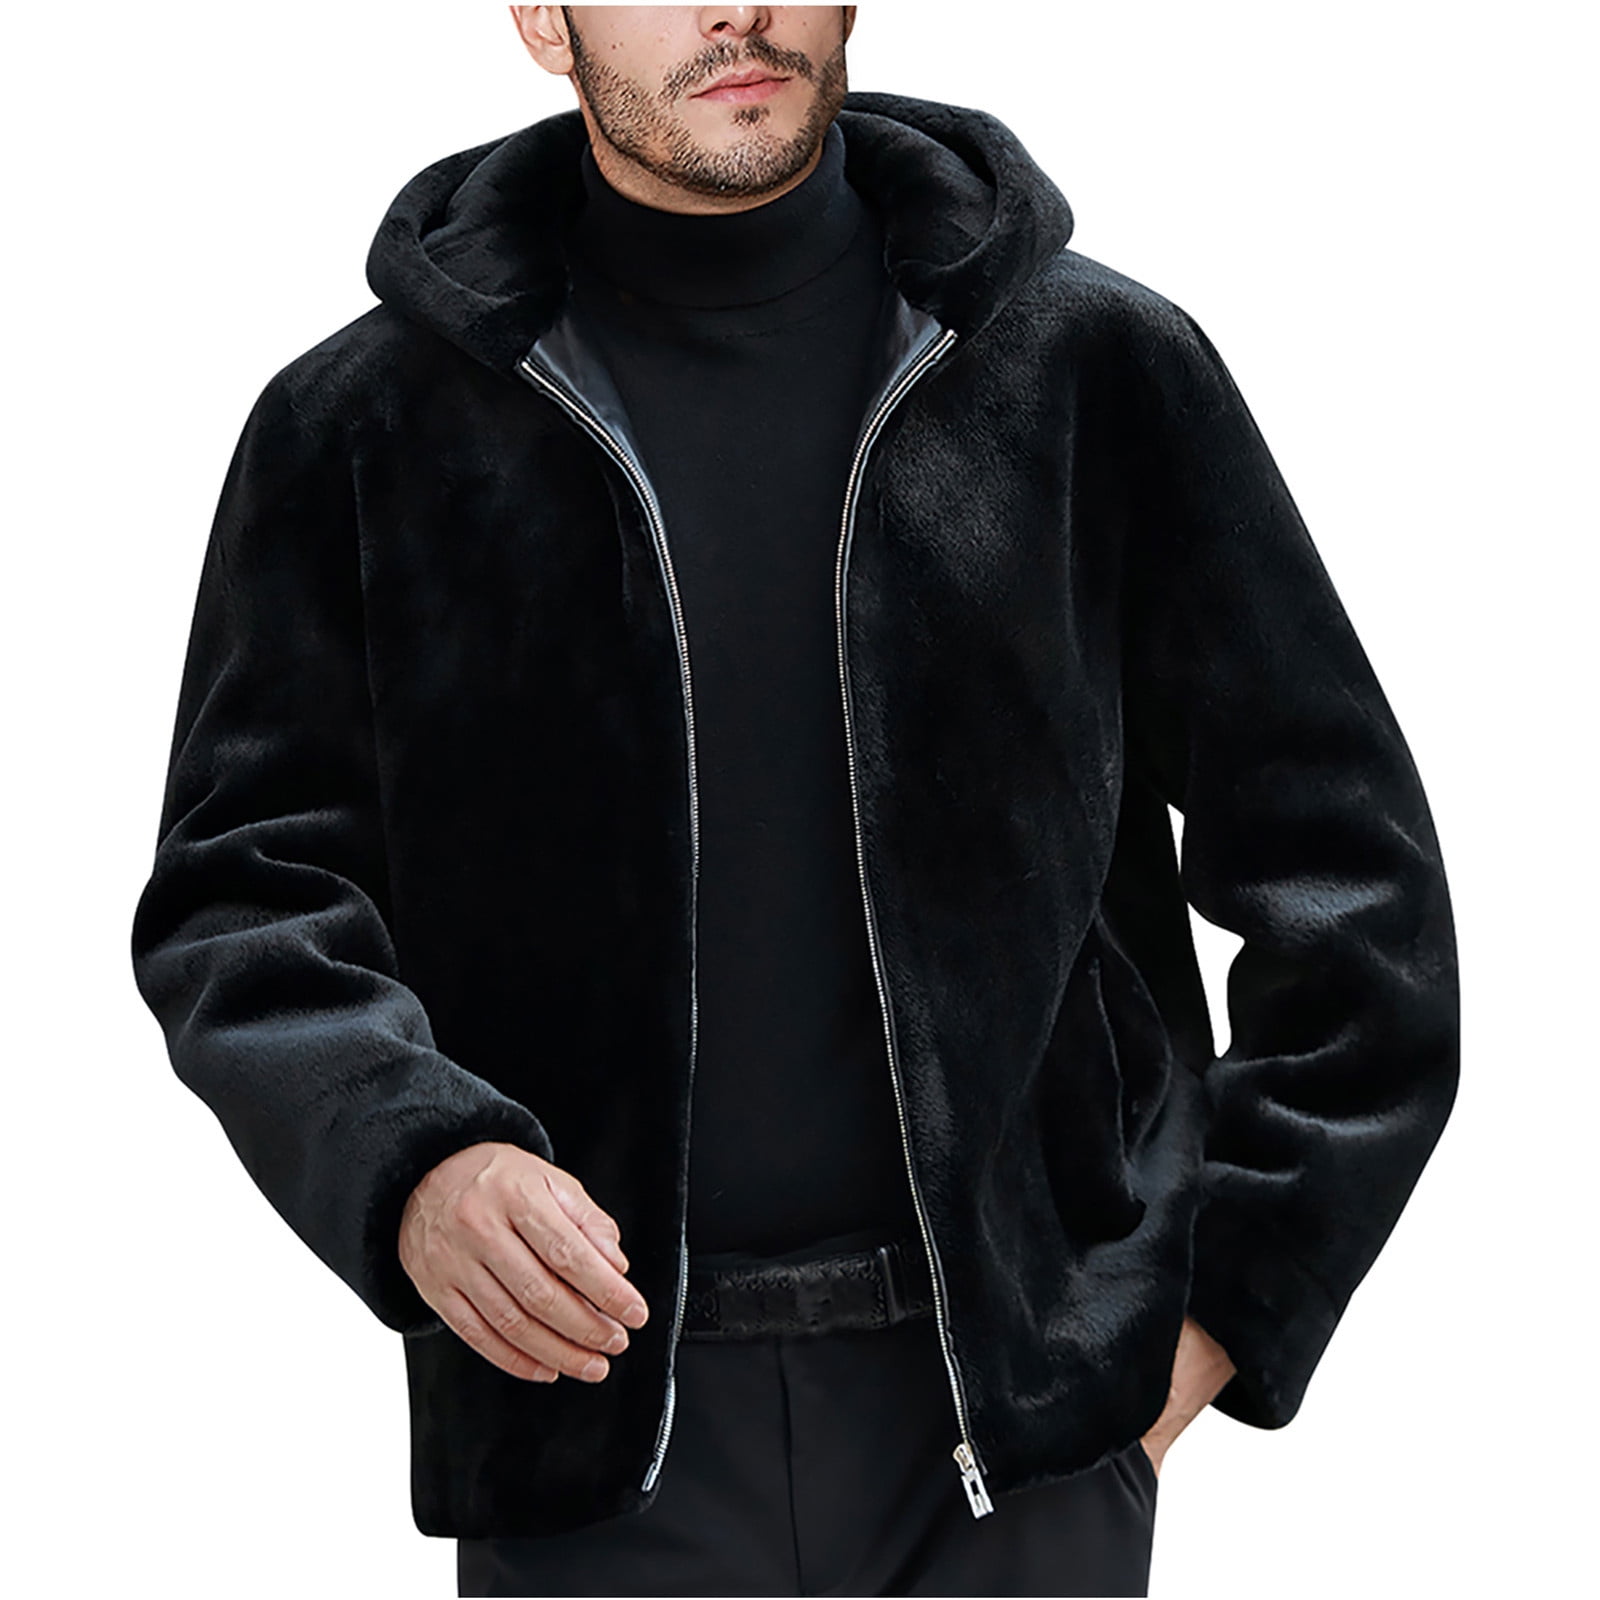 Olyvenn Winter Warm Men's Fashion Casual Cotton Jacket Cashmere Thickened  Long Sleeve Lapel Oversize Coat Outwear Padded Sports Fitness Overcoat  Black 8 